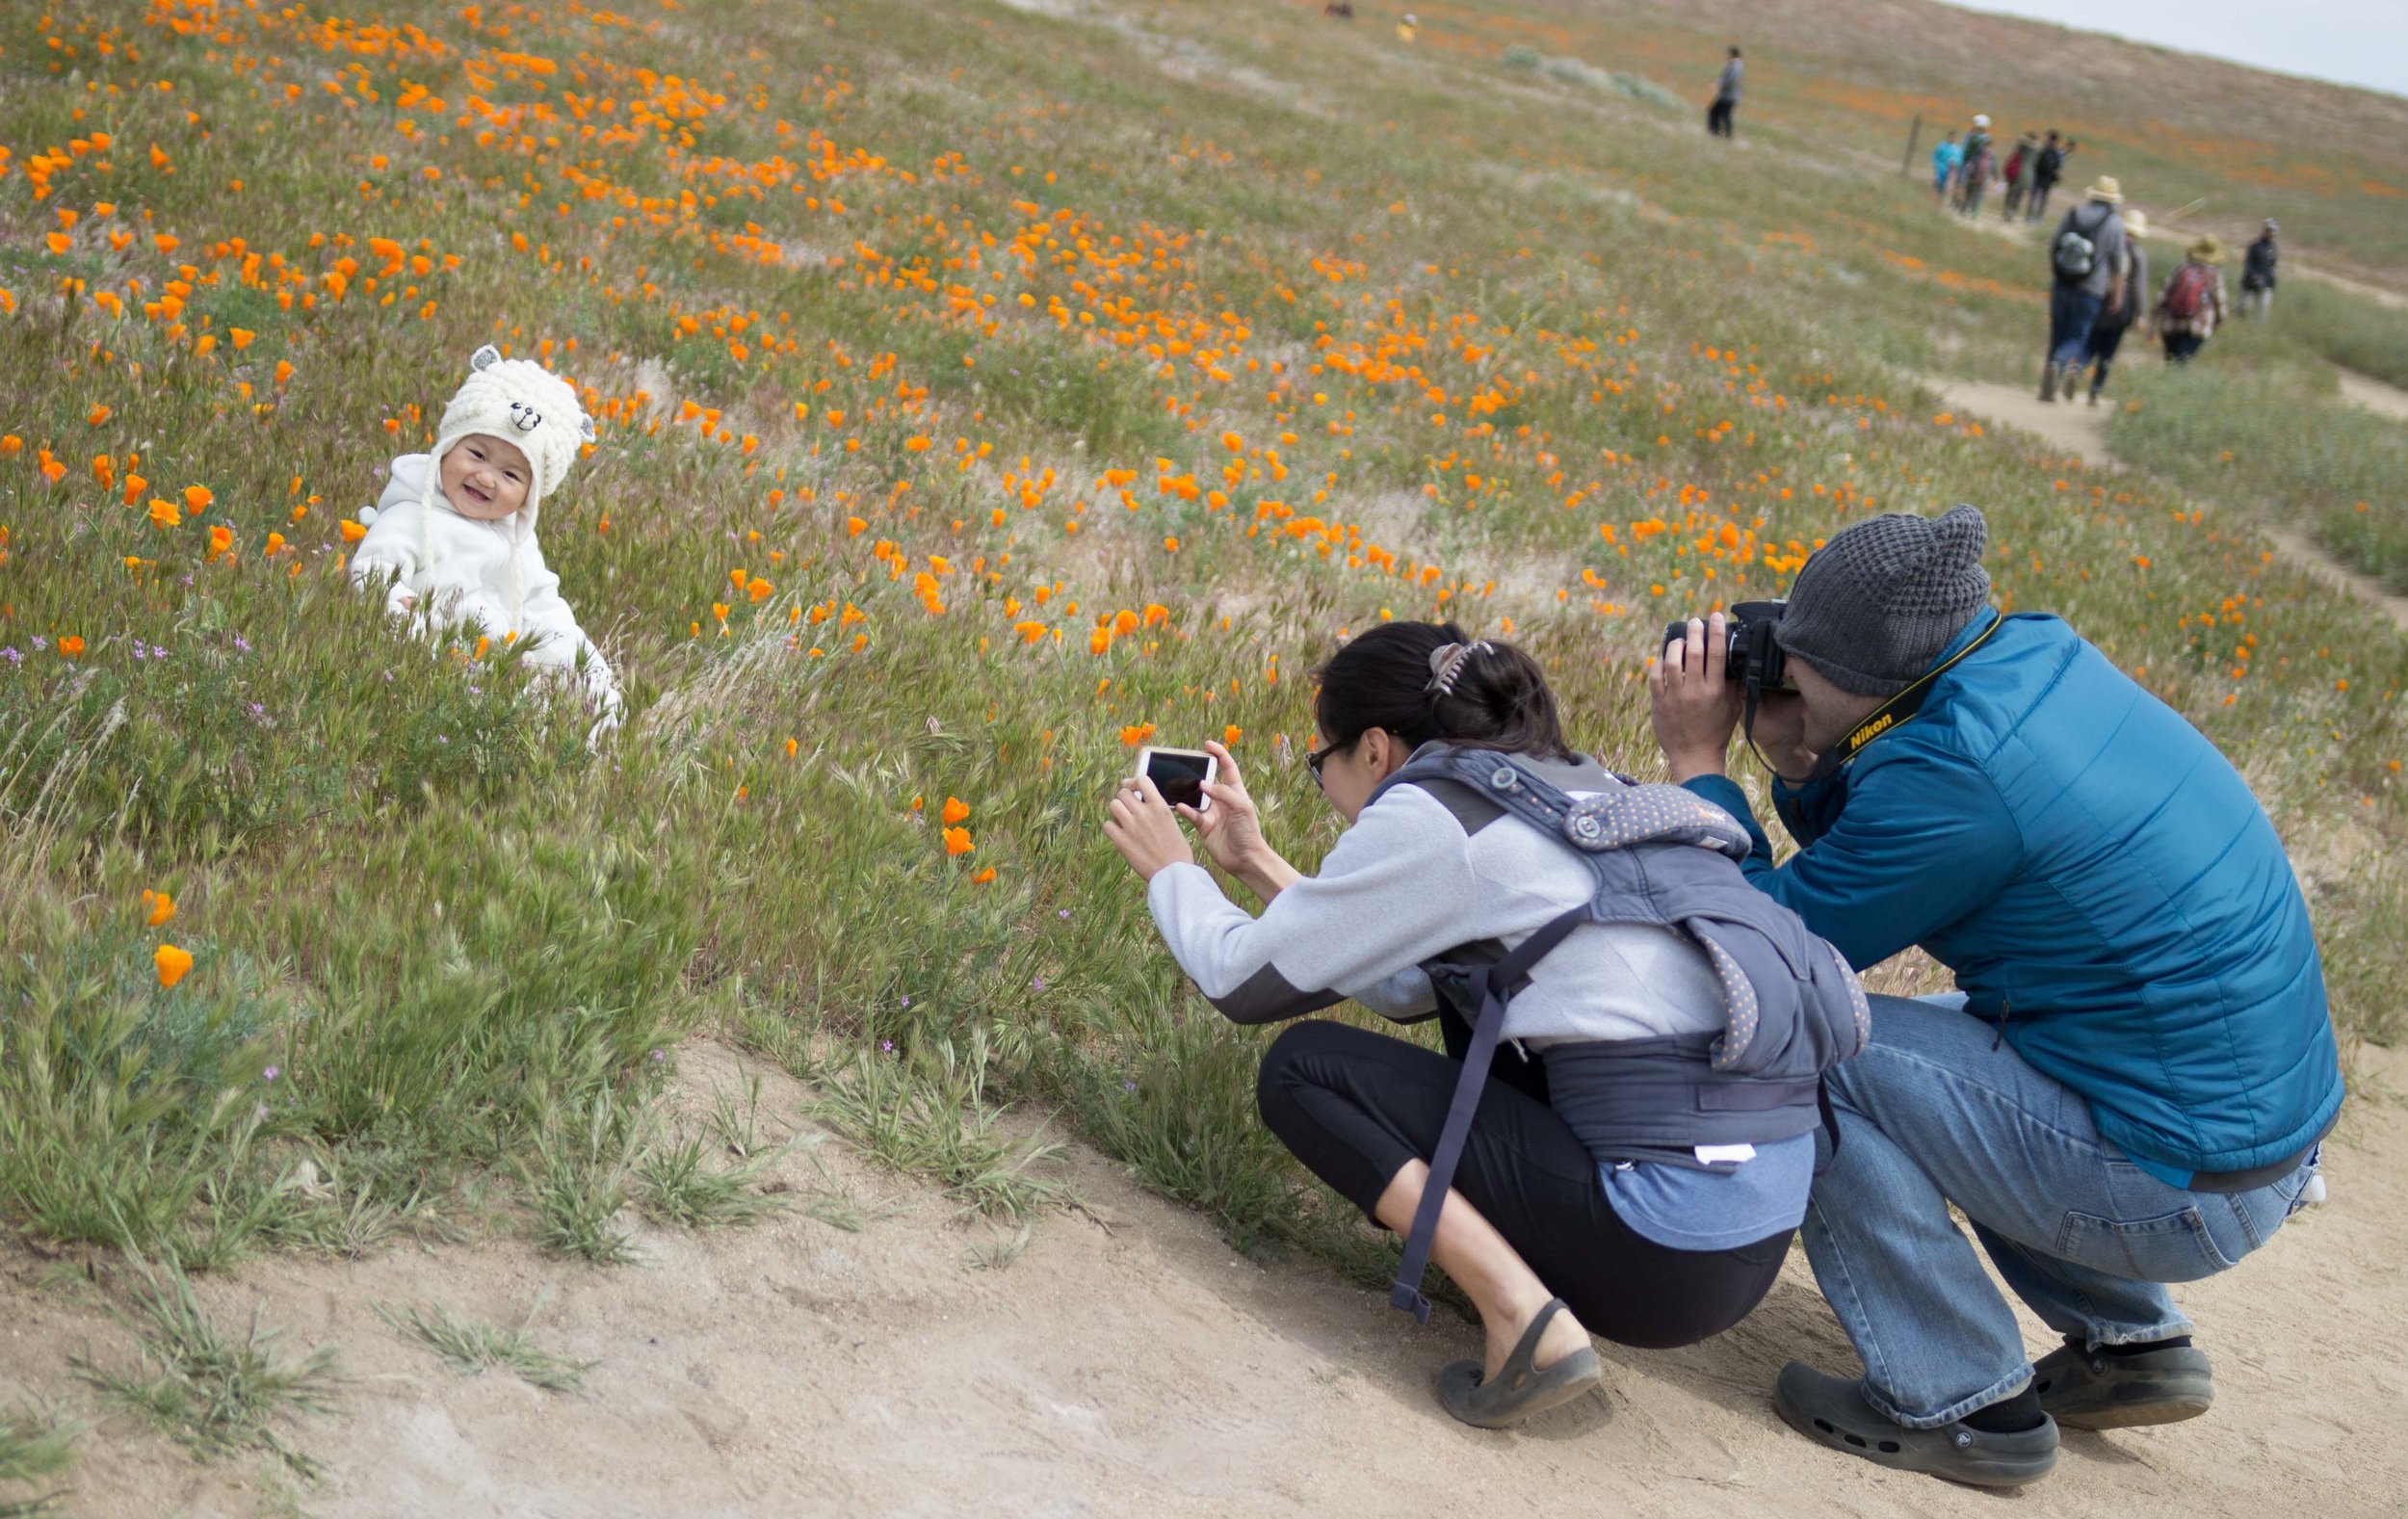  Parents photograph their child at the Antelope Valley Poppy Reserve in Antelope Valley California on April 8, 2017 at 11:19 AM (Photo By: Zane Meyer-Thornton 